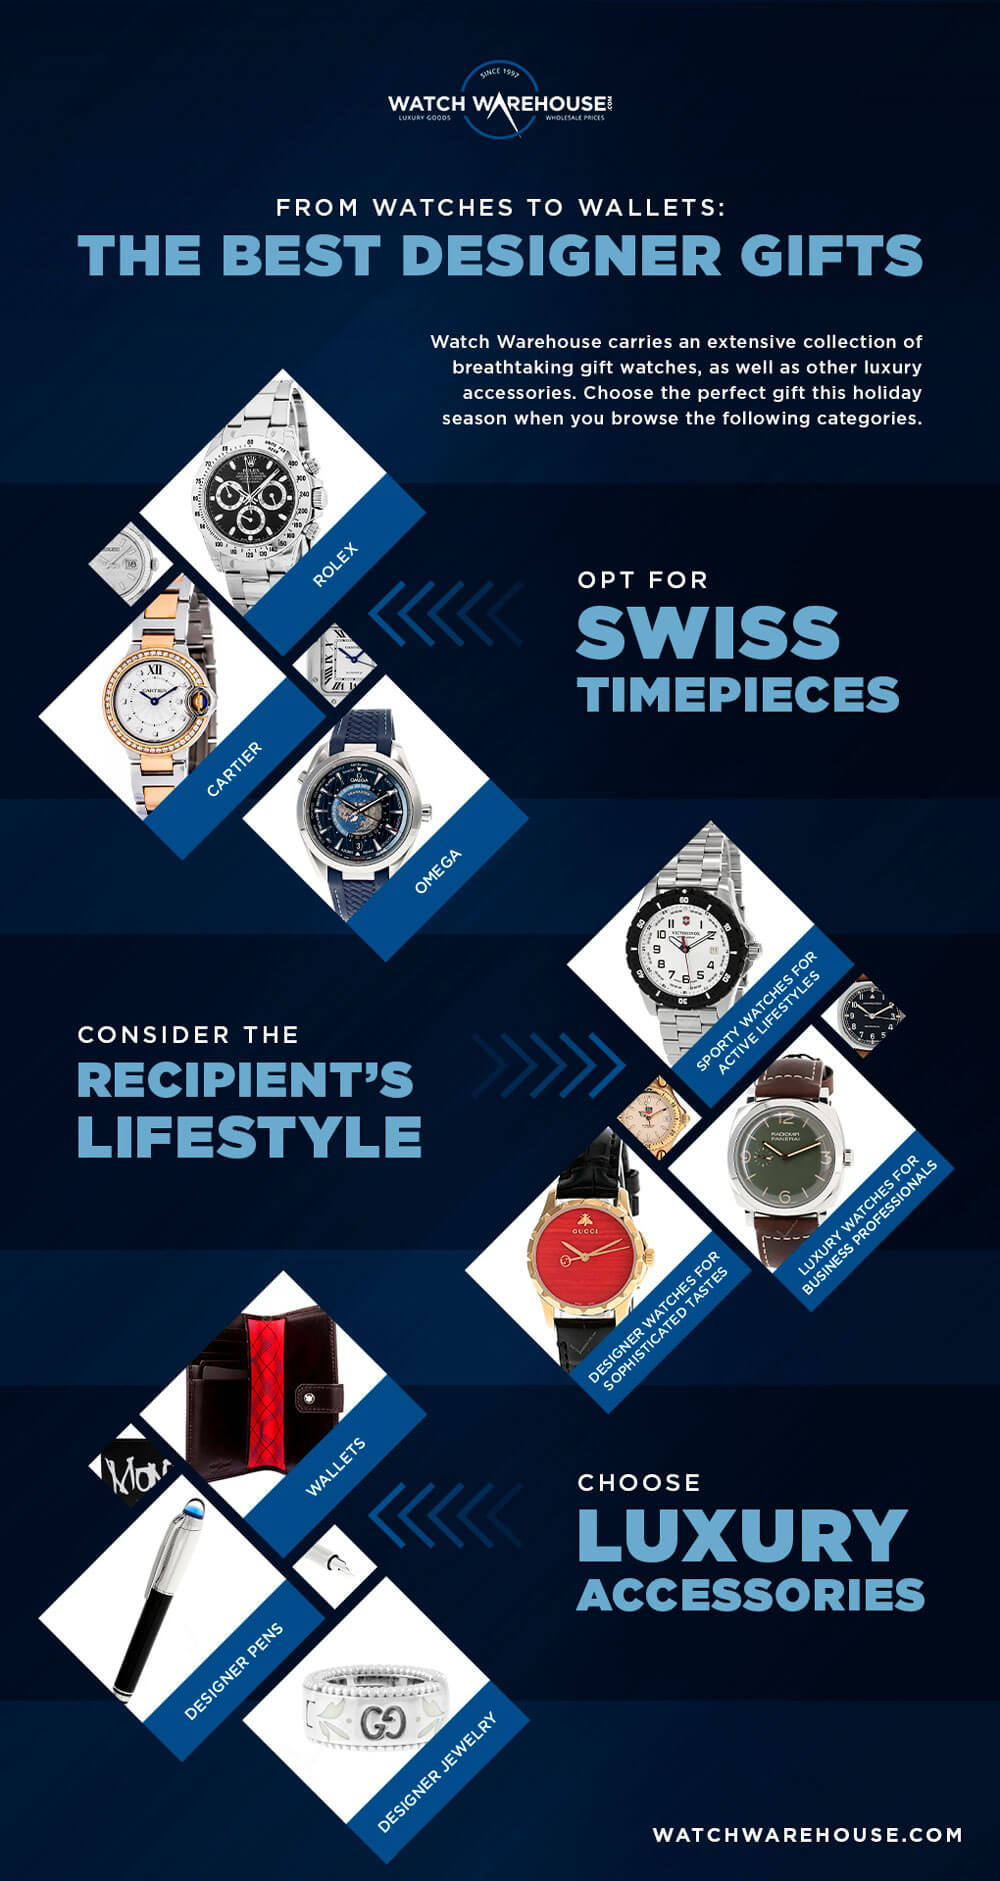 An infographic by Watch Warehouse on how to purchase the best designer gifts.